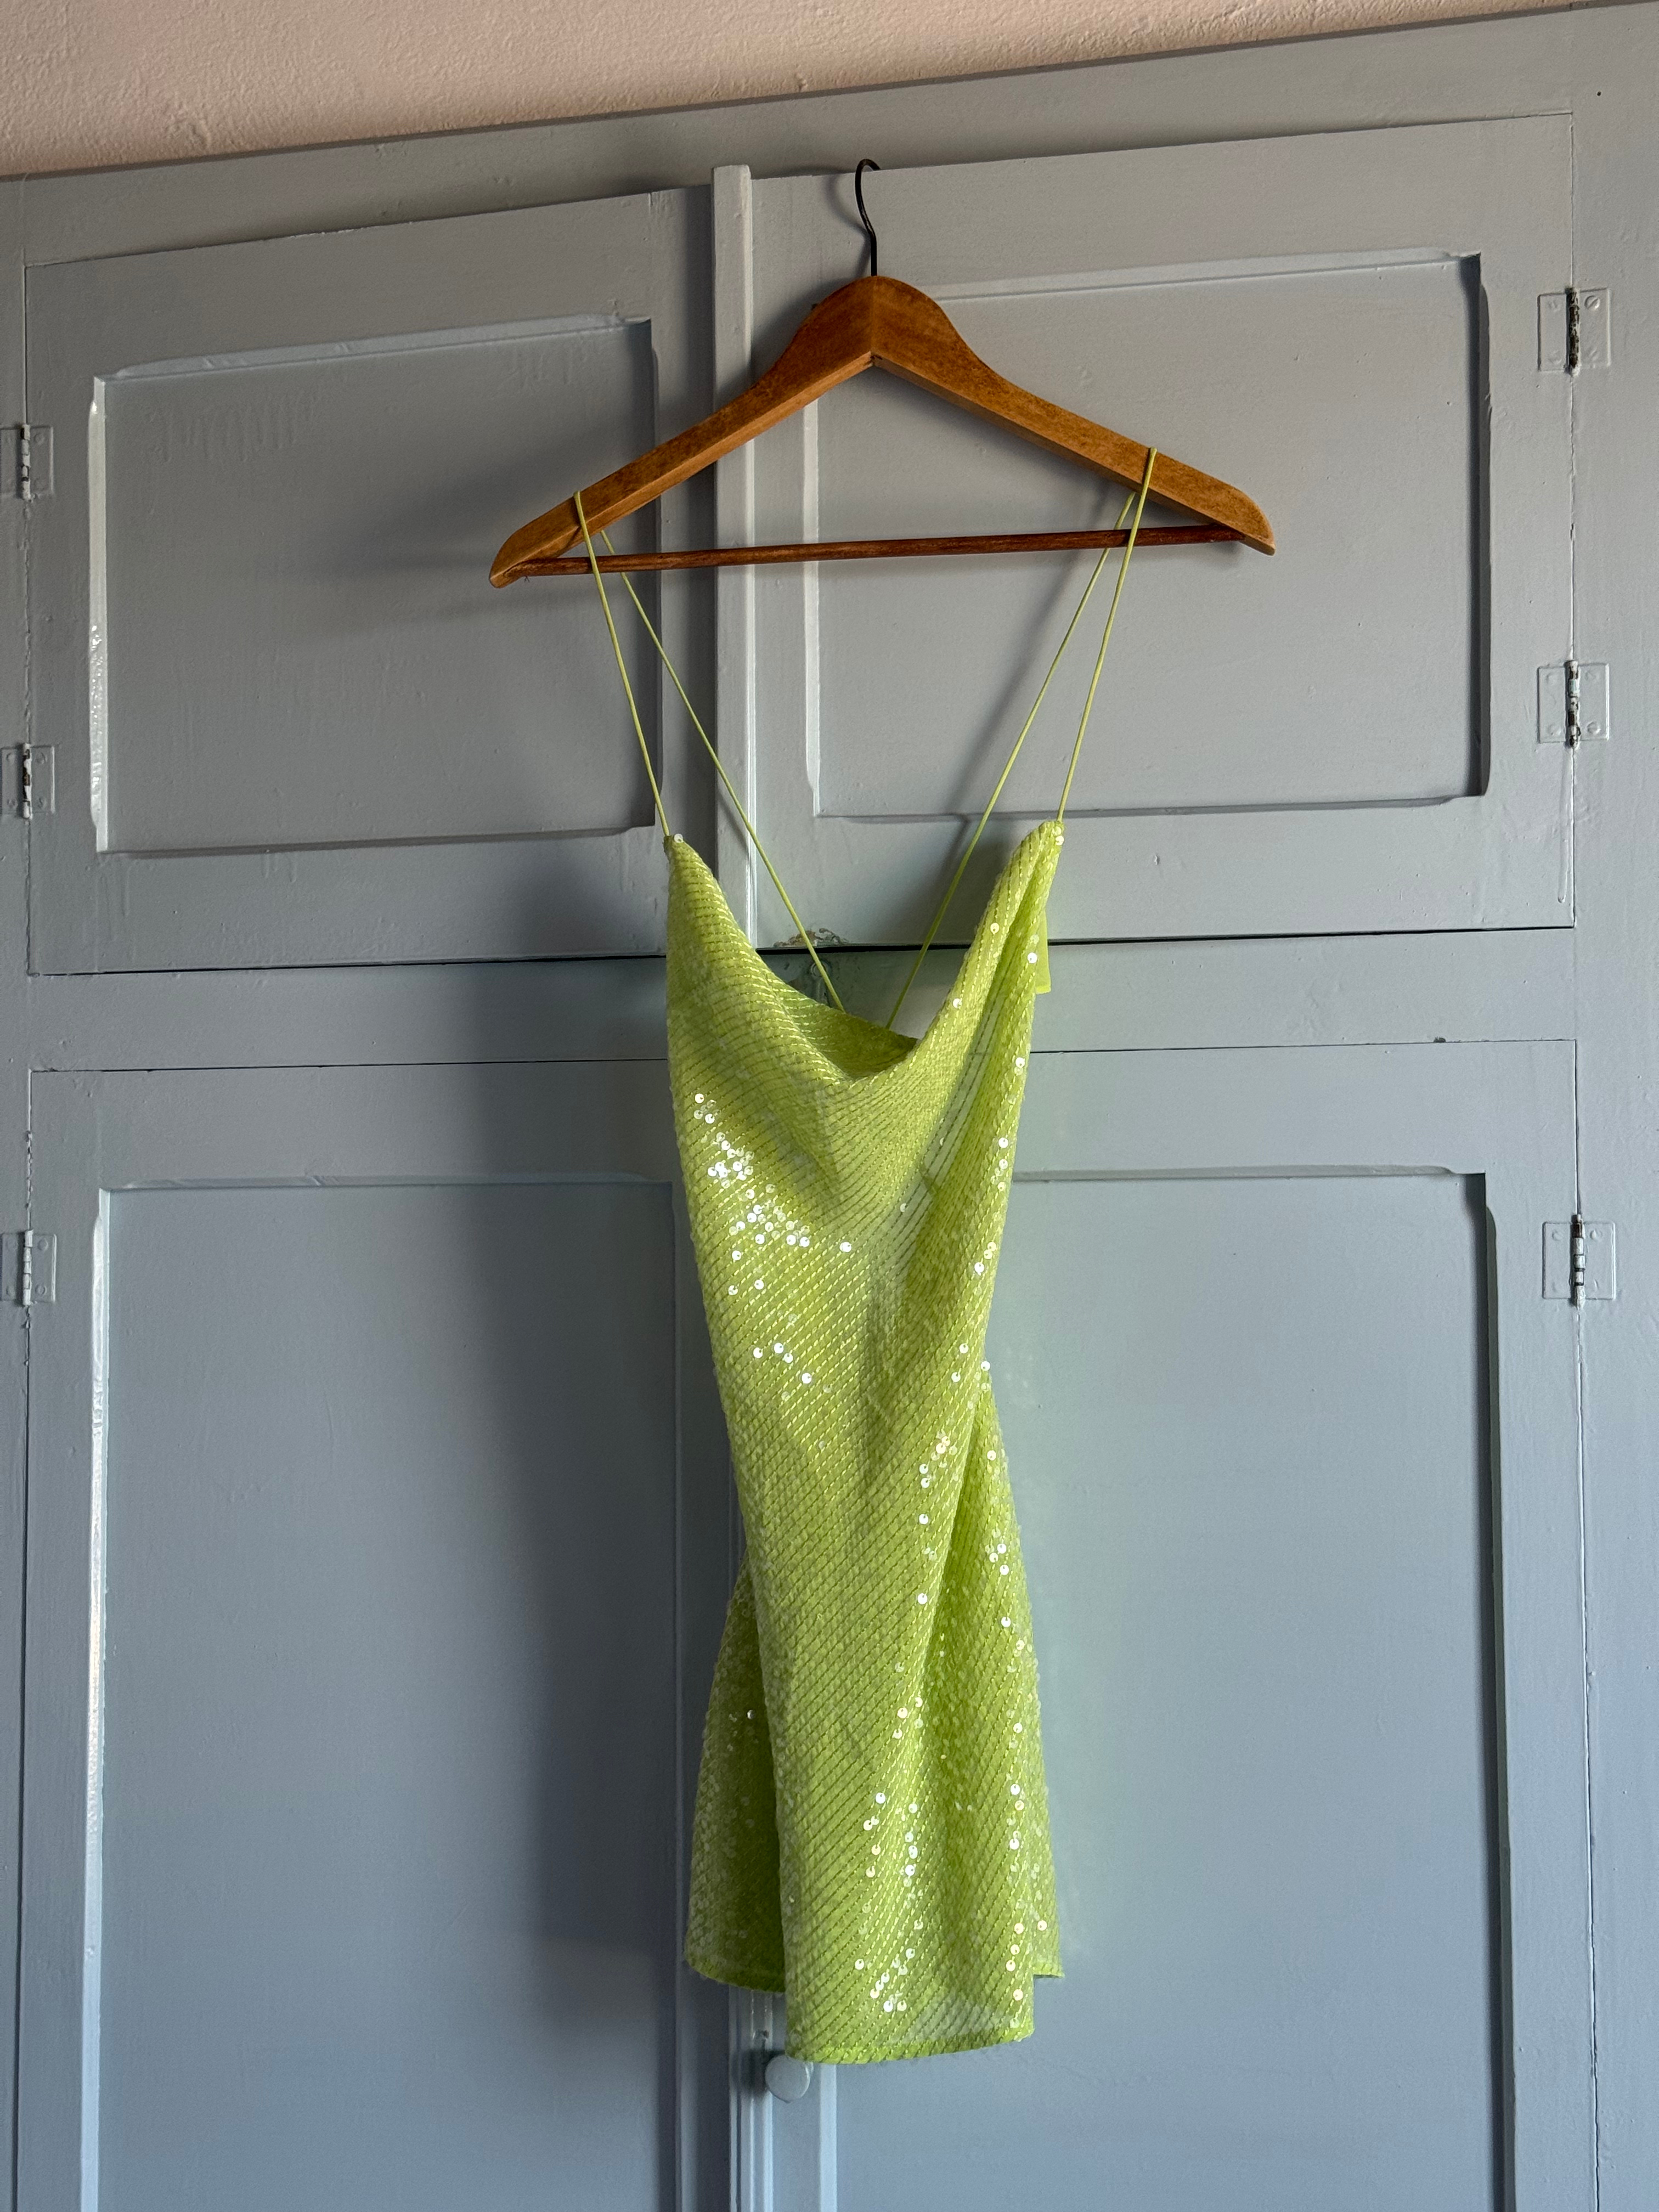 A green shimmery dress hangs gracefully inside our hotel room, adding a touch of elegance to the interior decor